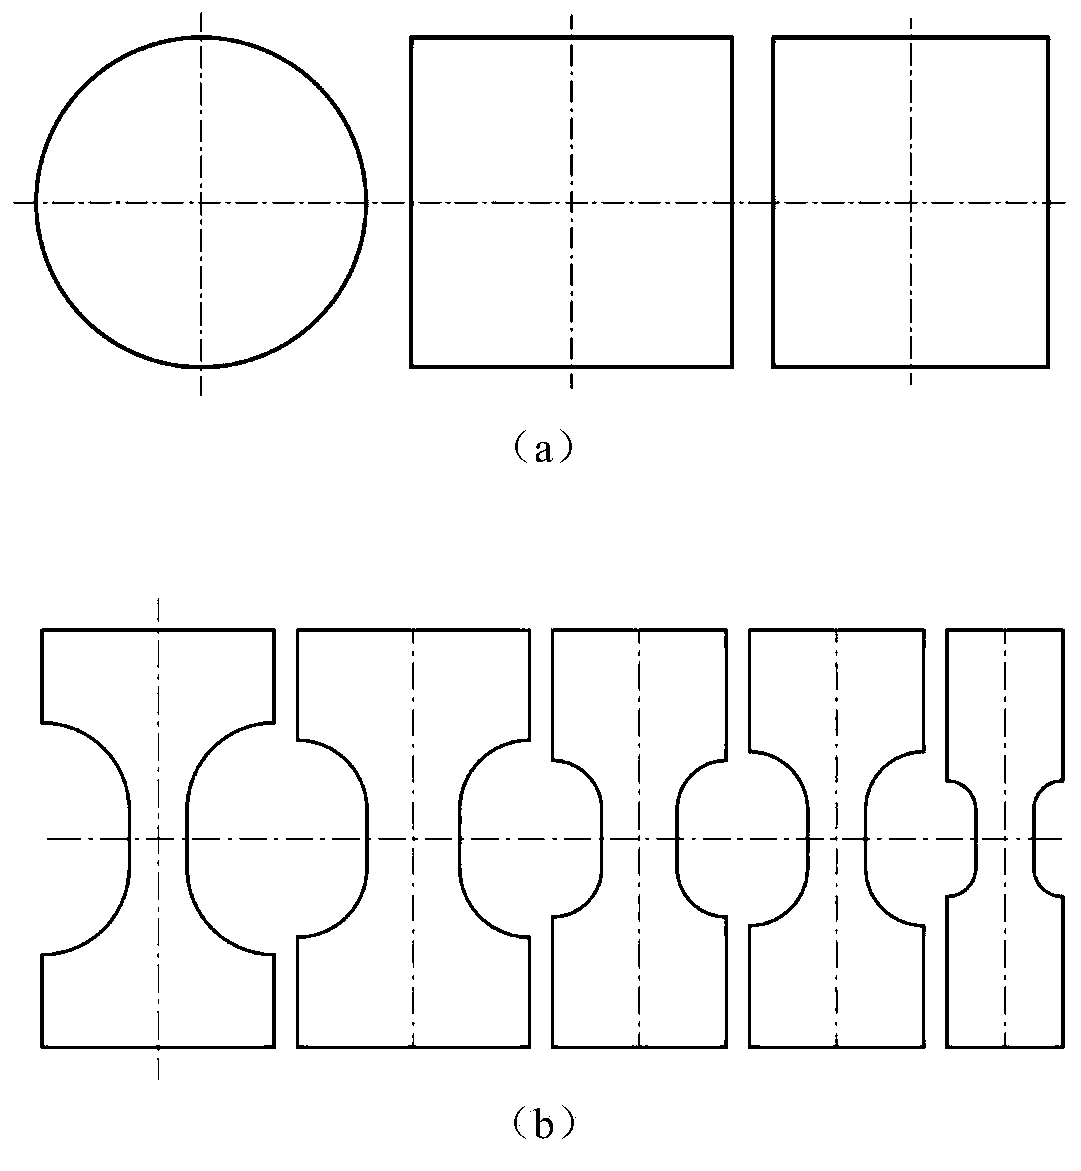 Application method of forming limit strain diagram under nonlinear strain path